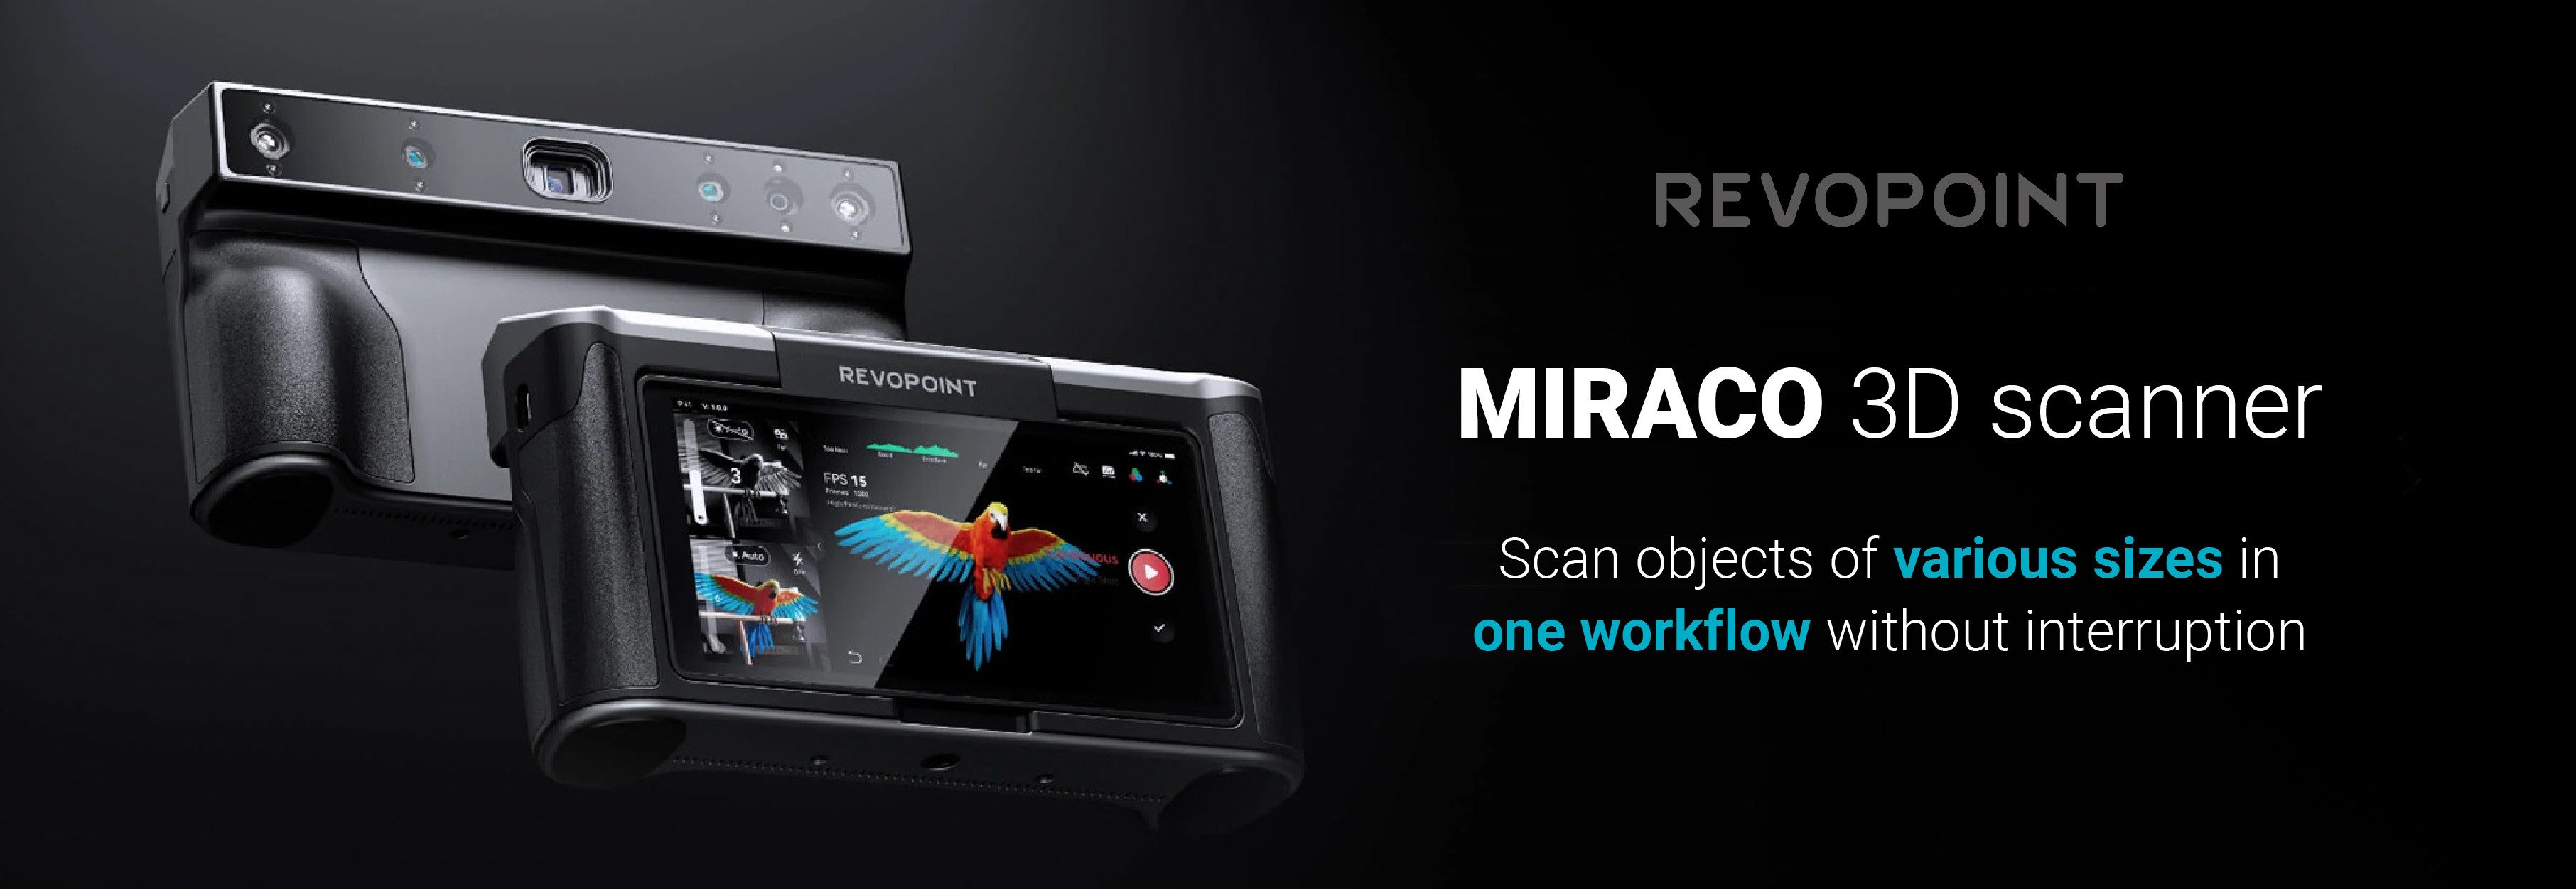 Revopoint Miraco 3D scanner